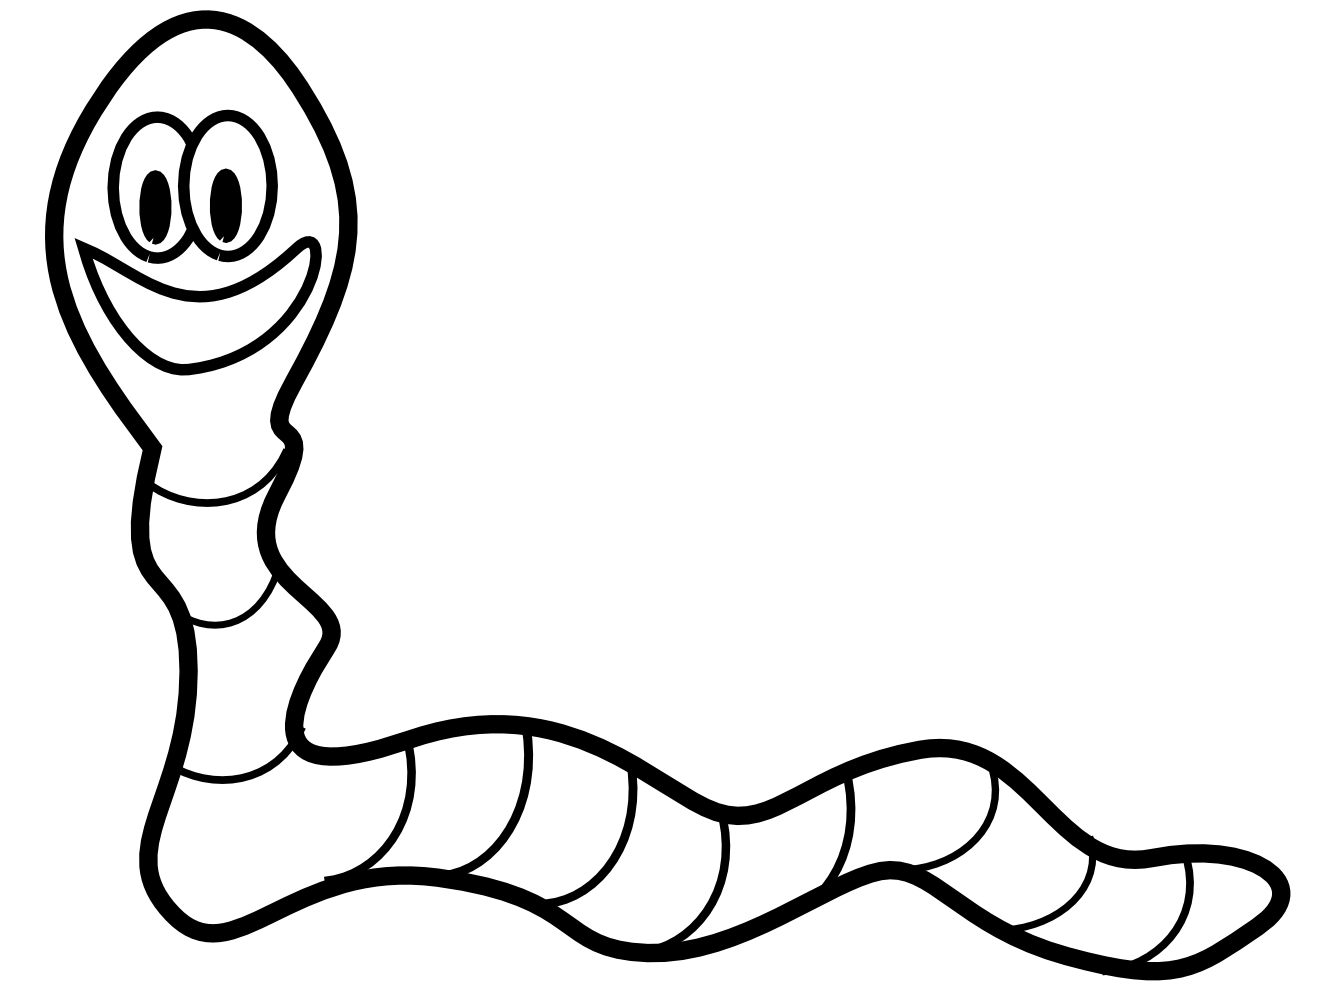 Free earthworm cliparts.